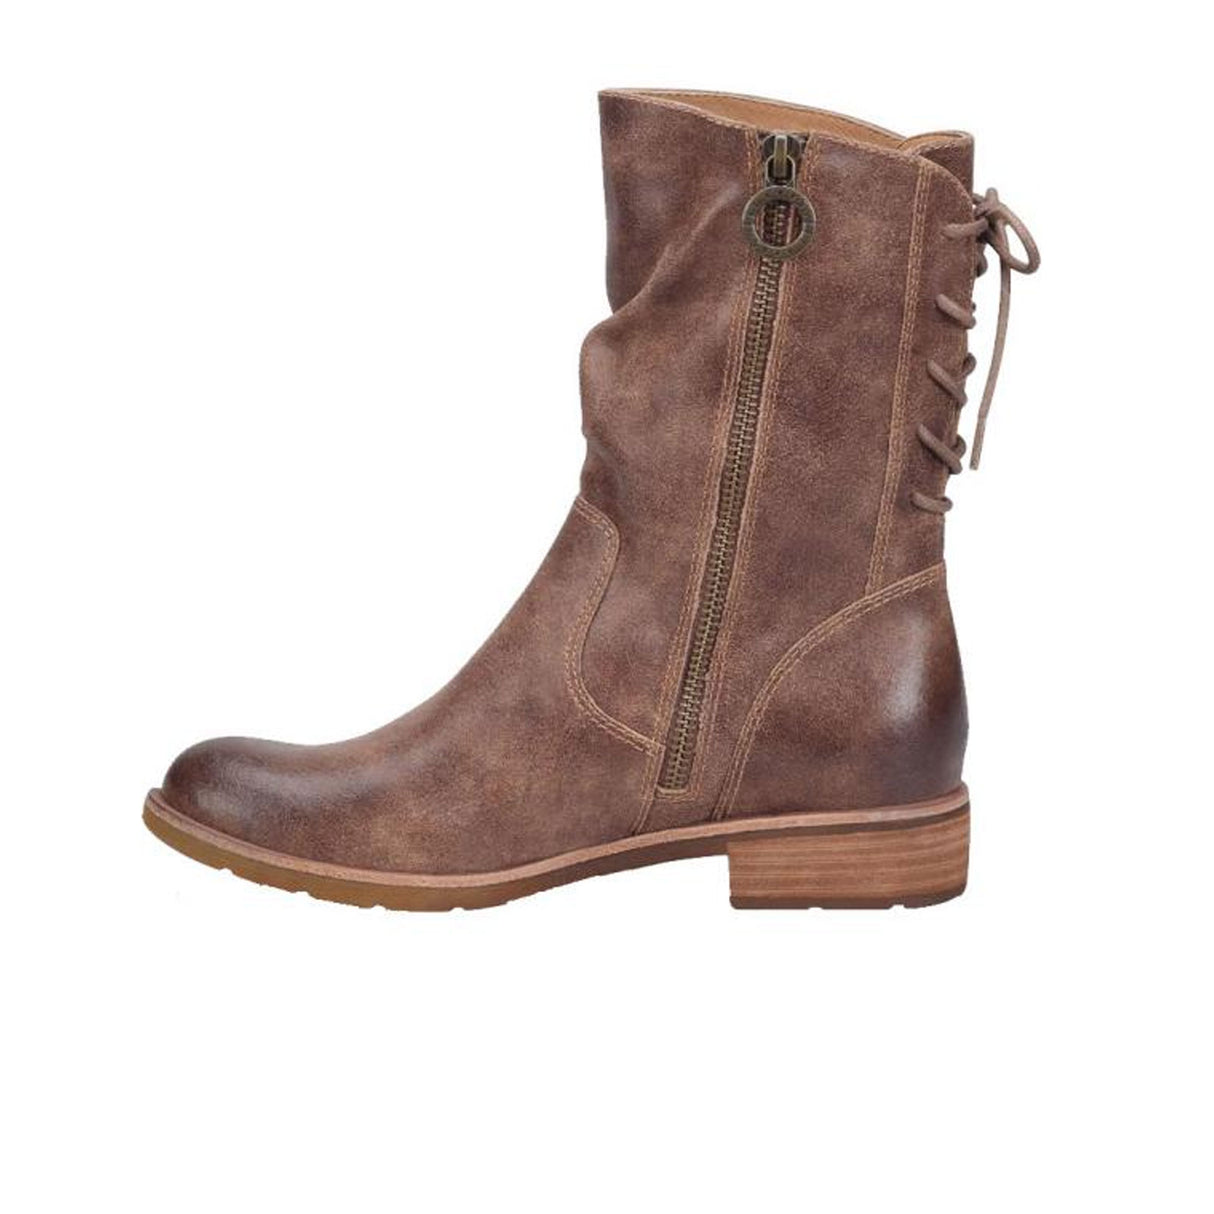 Sofft Sharnell Low Boot (Women) - Brown Boots - Fashion - Mid Boot - The Heel Shoe Fitters